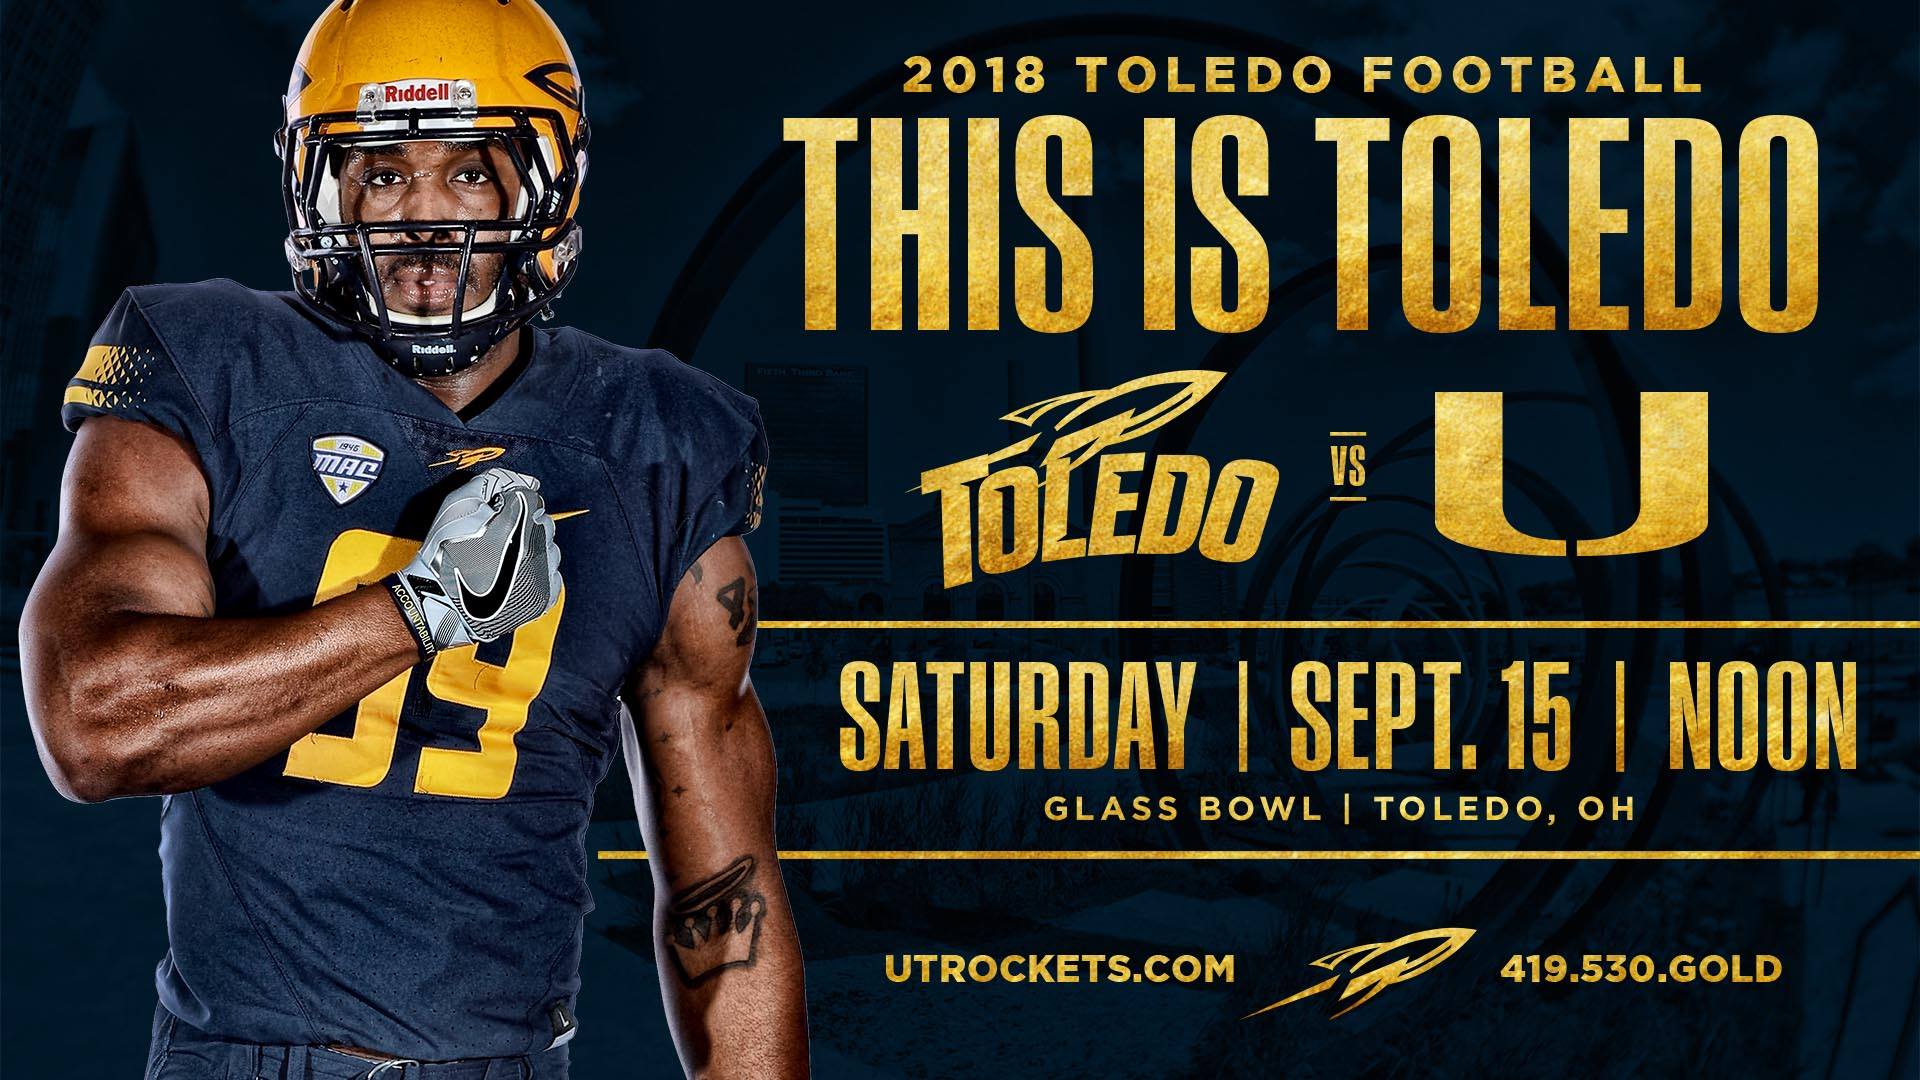 The University of Toledo on Twitter "Just over 24 hours until the